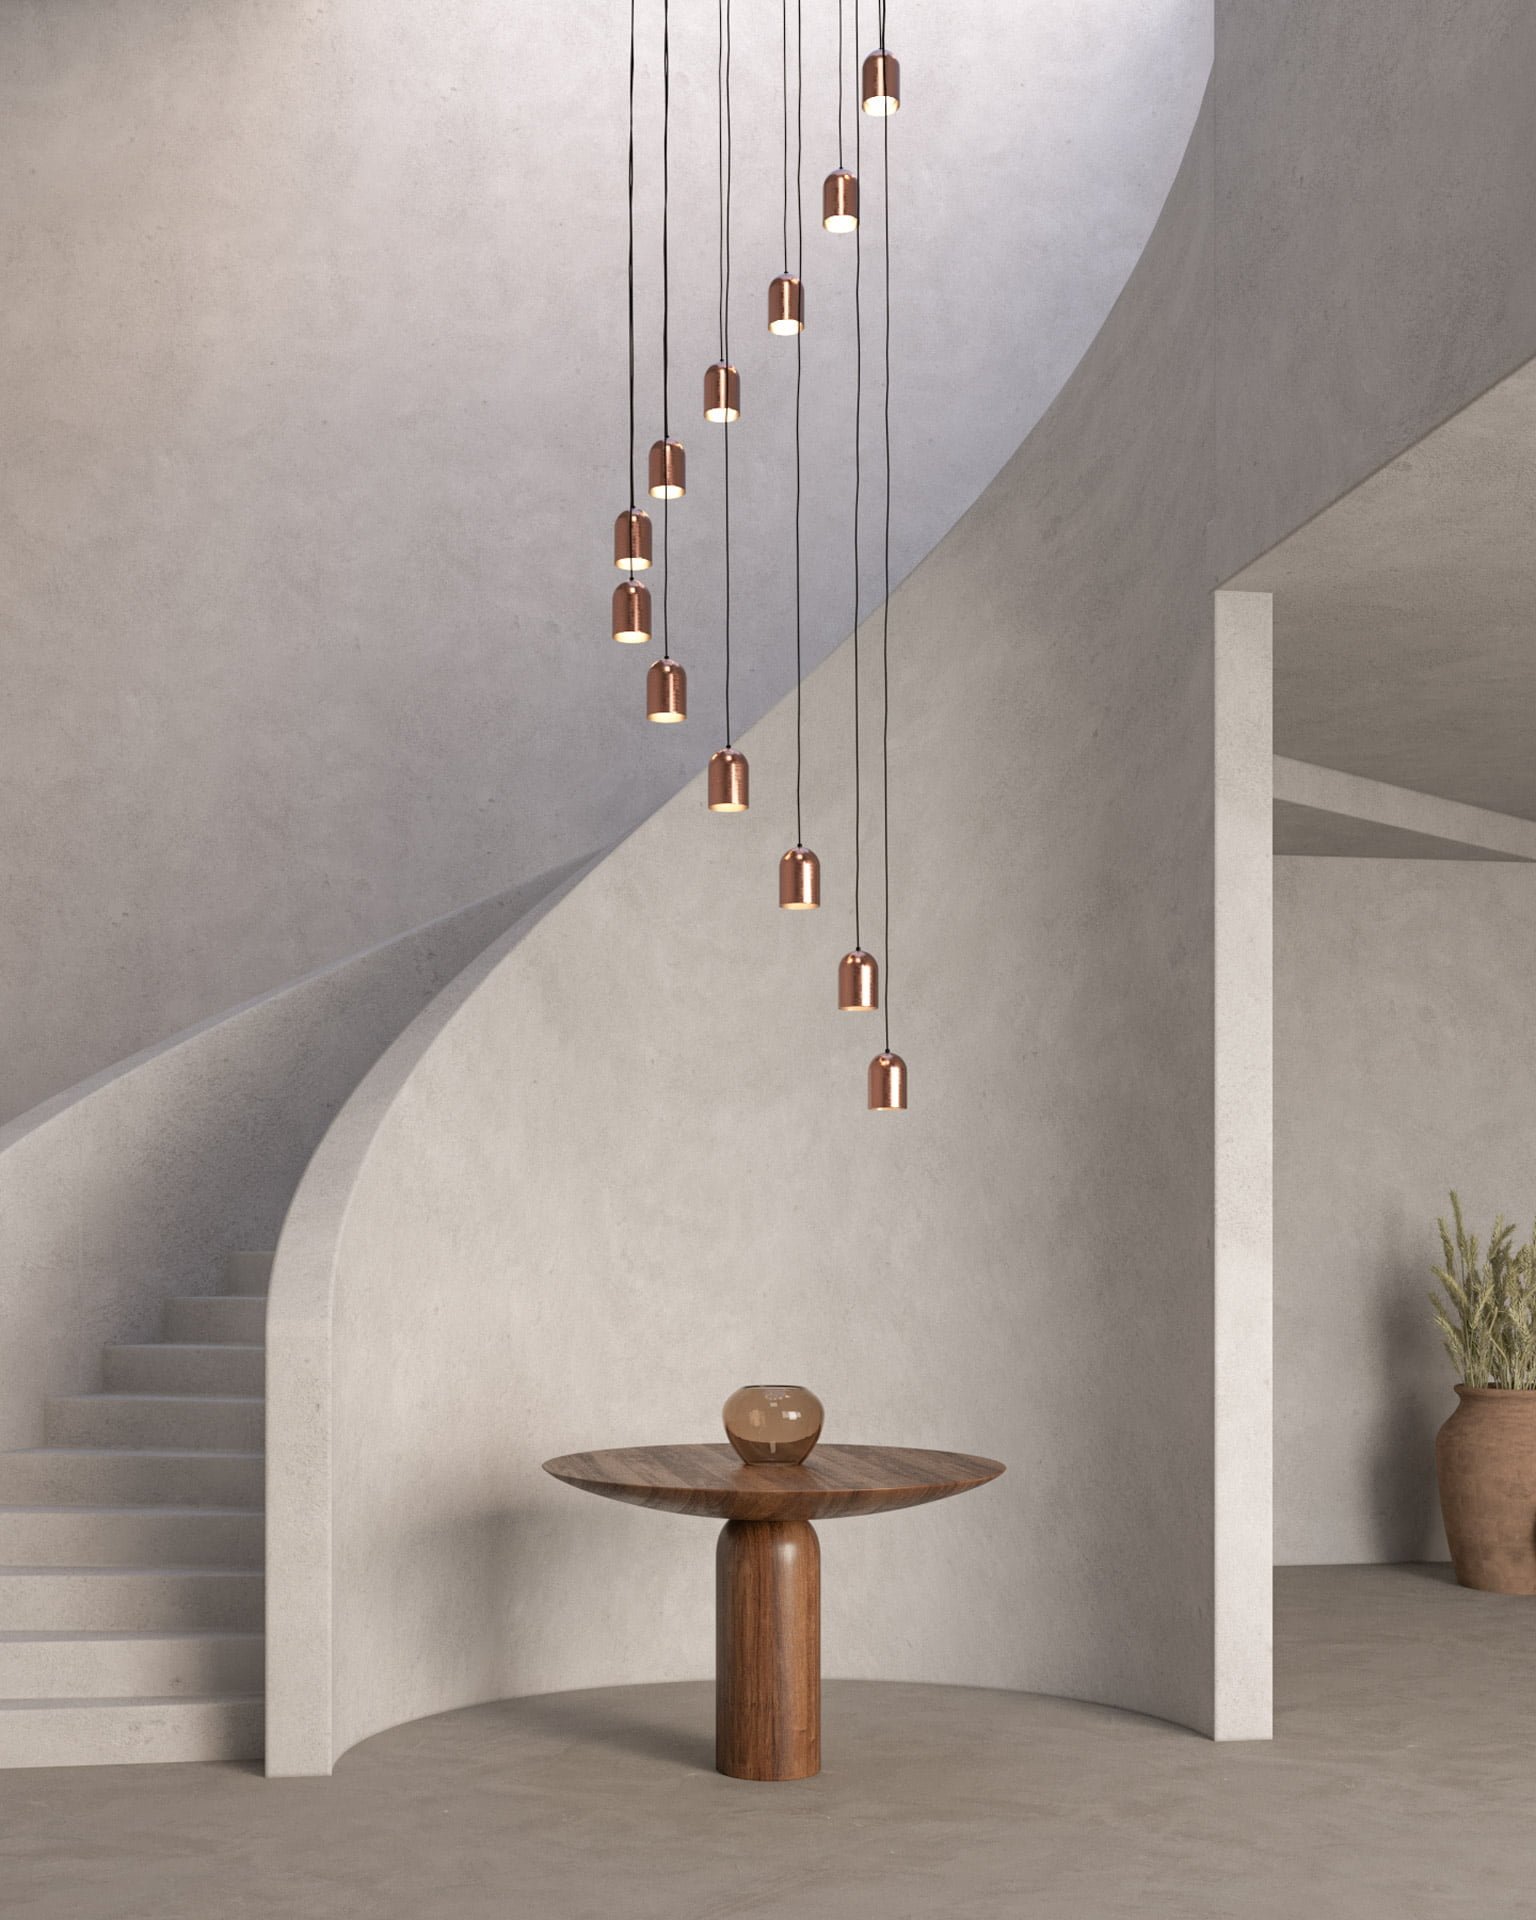 Pendant lamp for interior made of brush cooper in stairs or lobby